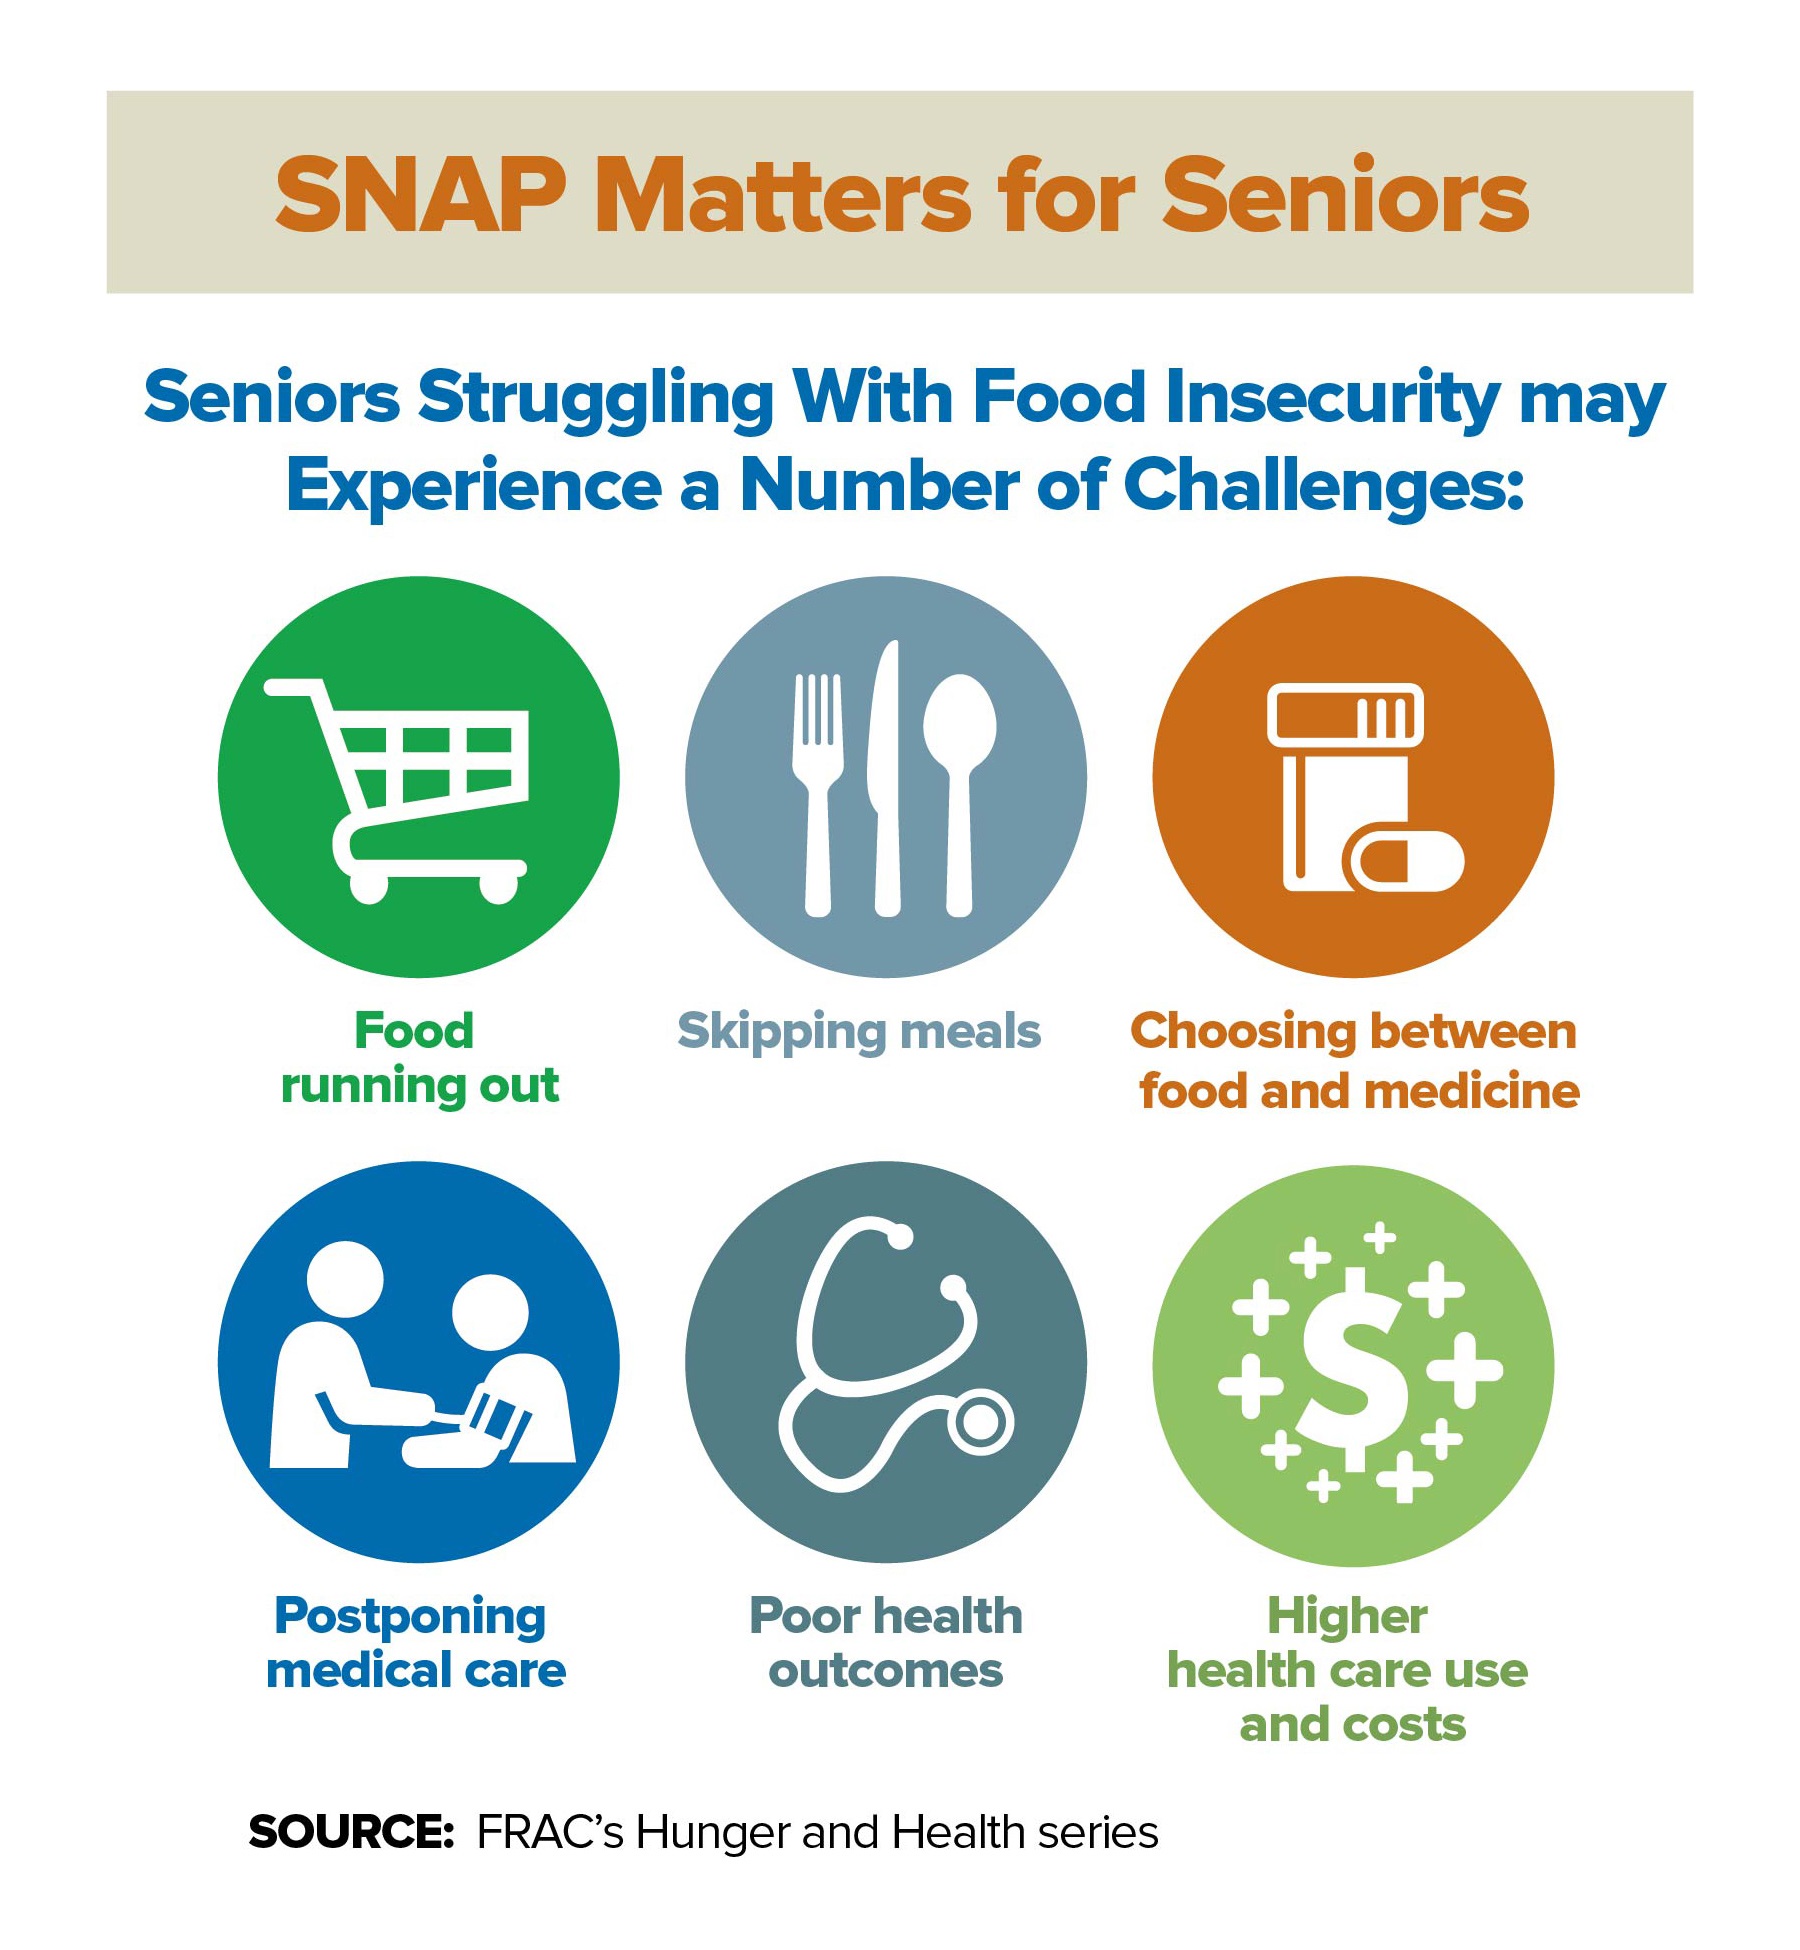 https://frac.org/wp-content/uploads/senior-infographic-food-insecure-seniors-experience-challenges.jpg